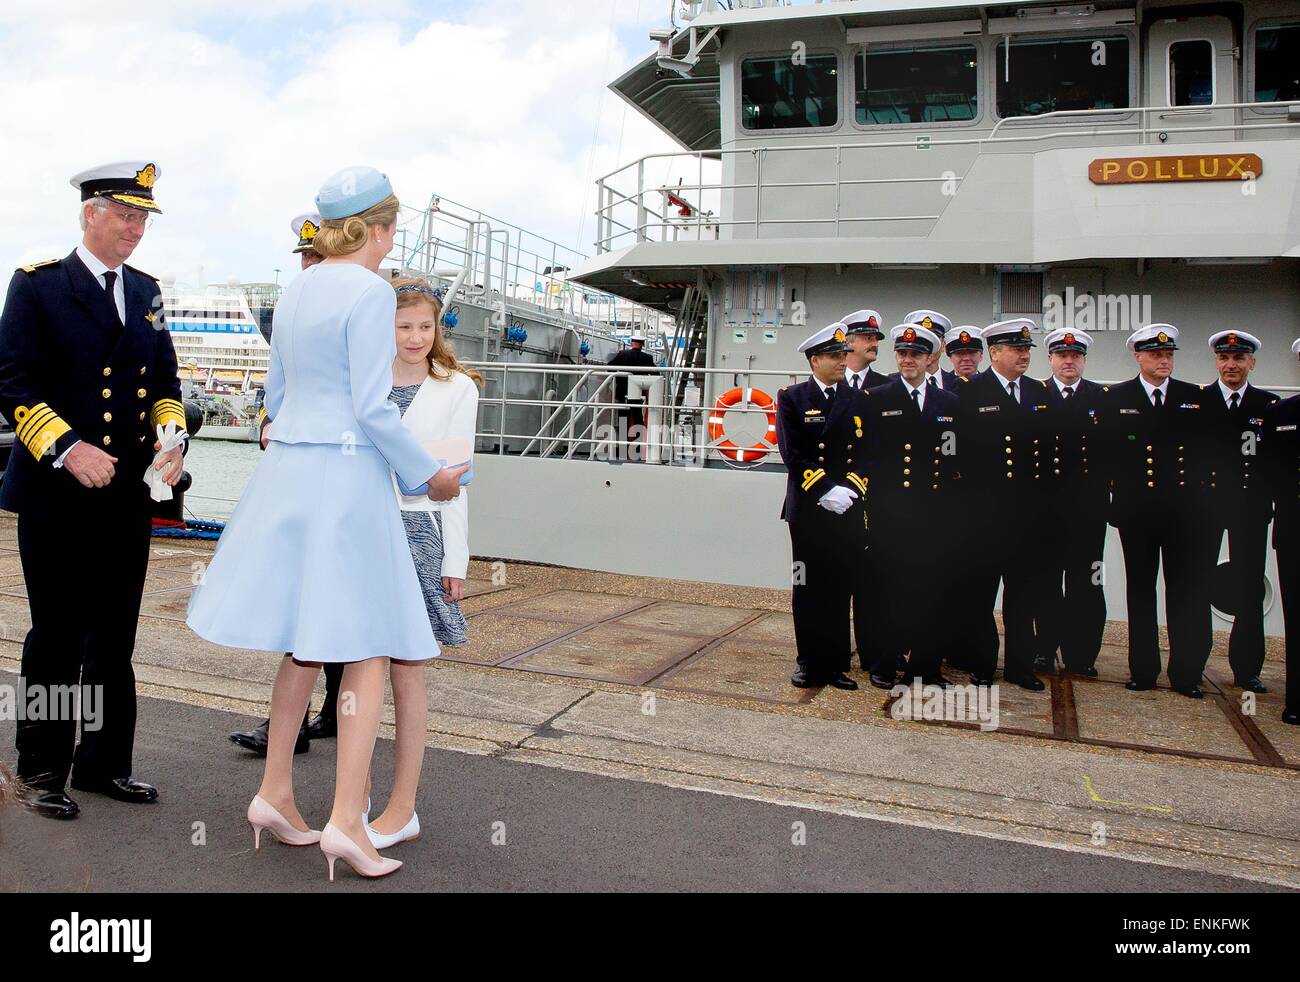 Queen Mathilde of Belgium, Crown Princess Elisabeth and King Philippe - Filip of Belgium  attend the christening of navy ship P902 patrol Pollux at the naval base in Zeebrugge, Belgium, 06 May 2015. Photo: Albert Nieboer/RPE/NETHERLANDS OUT - NO WIRE SERVICE - - NO WIRE SERVICE - Stock Photo